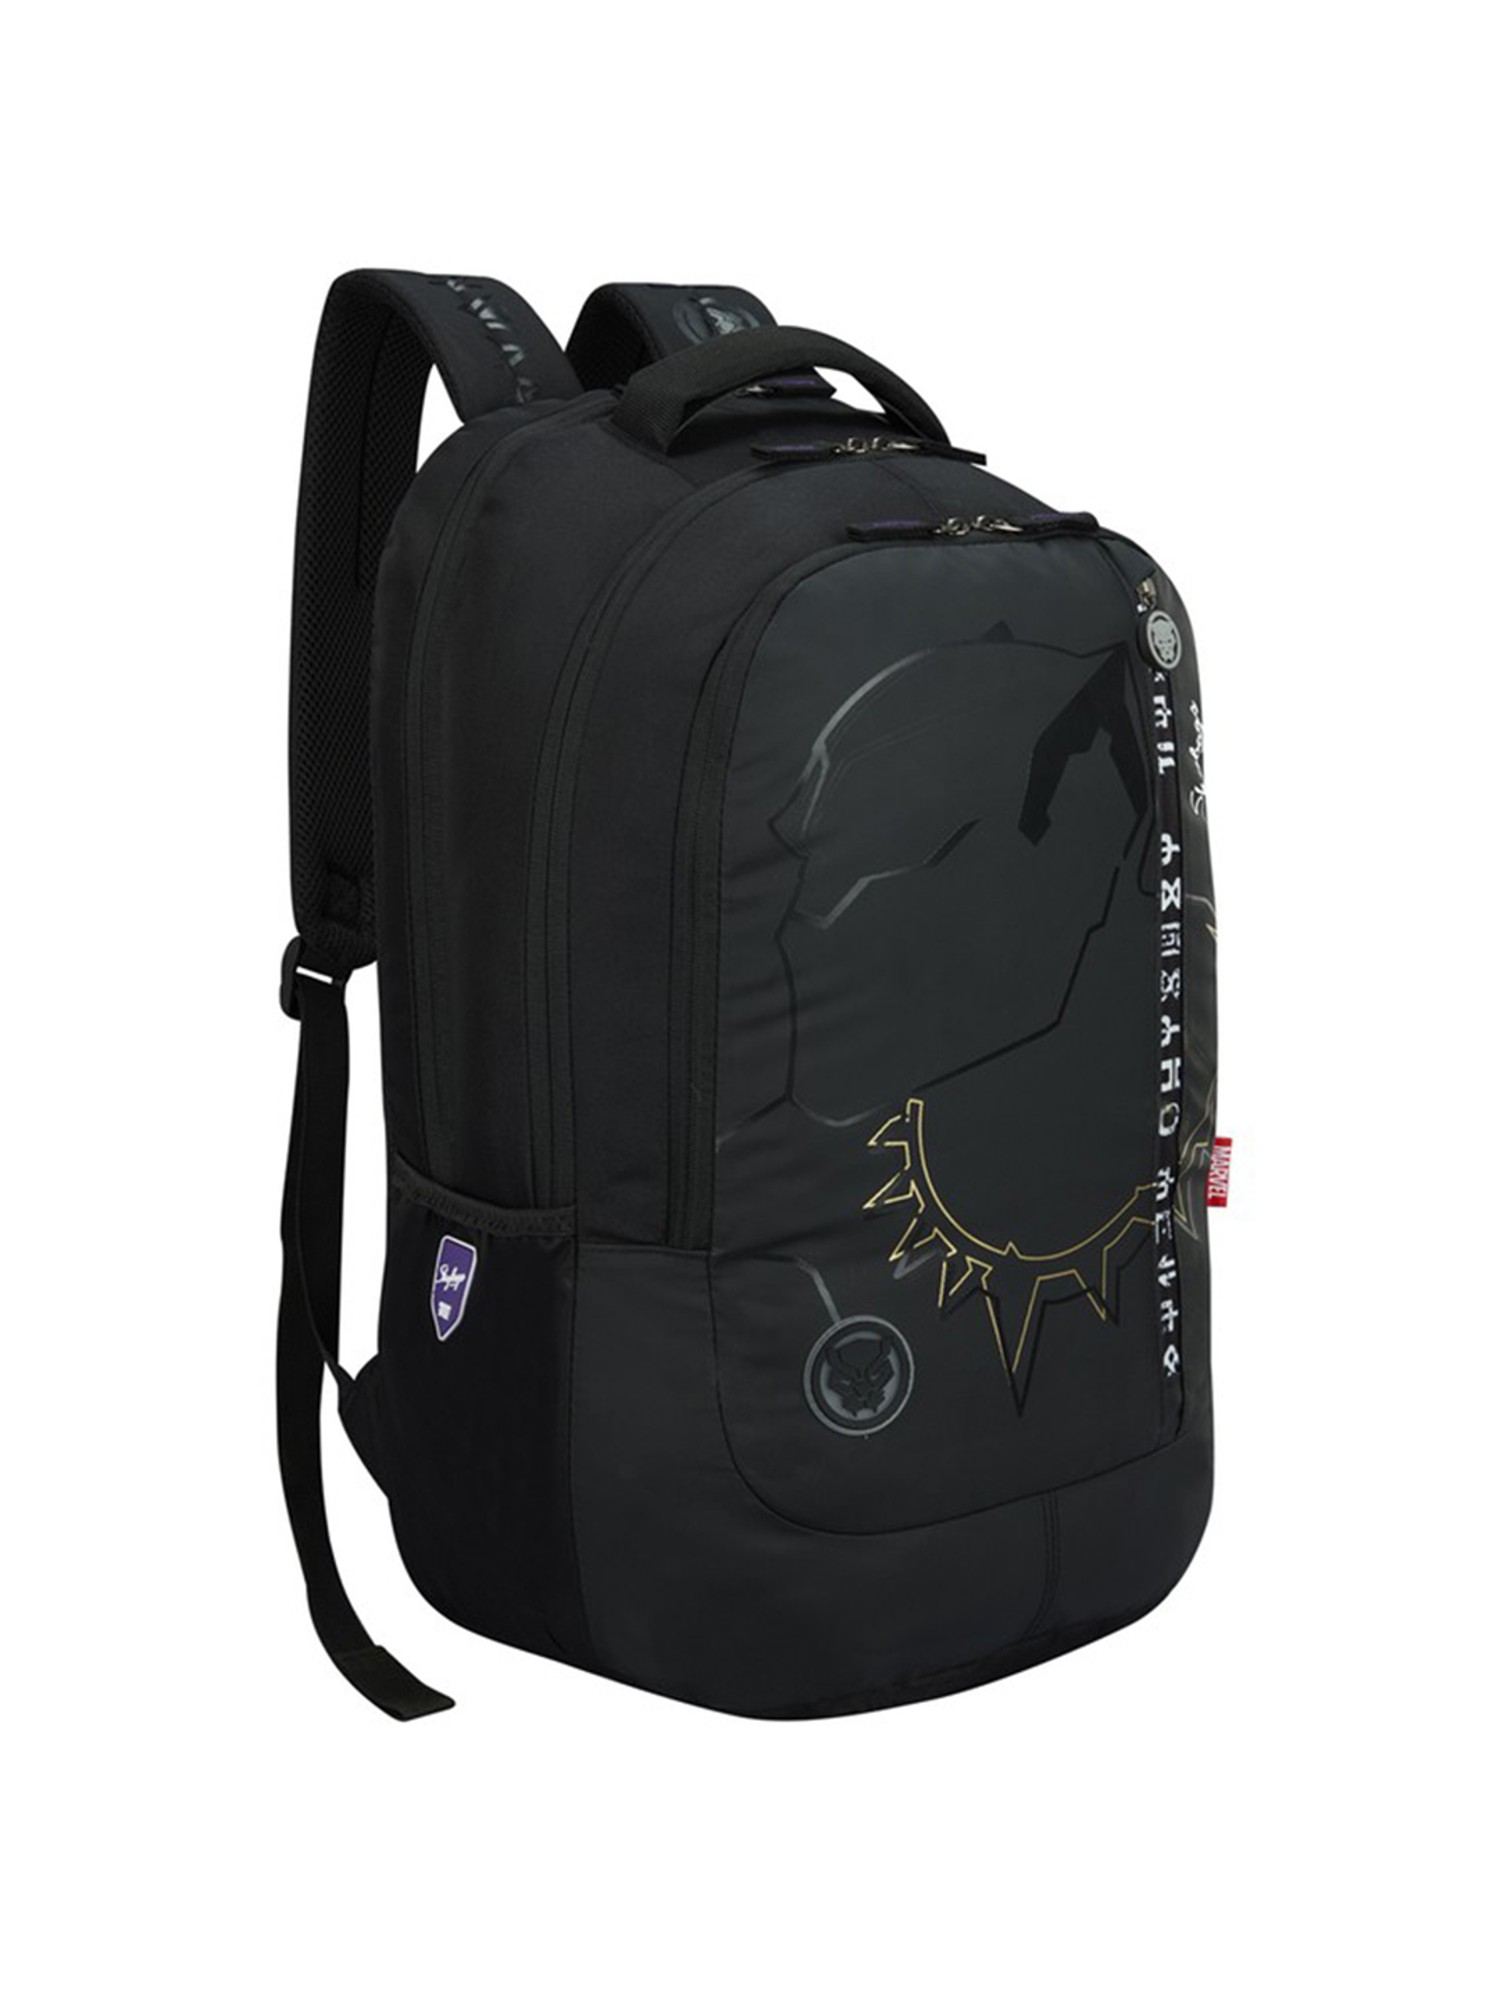 Buy Black Panther Throne Printed Small Backpacks Online in India at Bewakoof